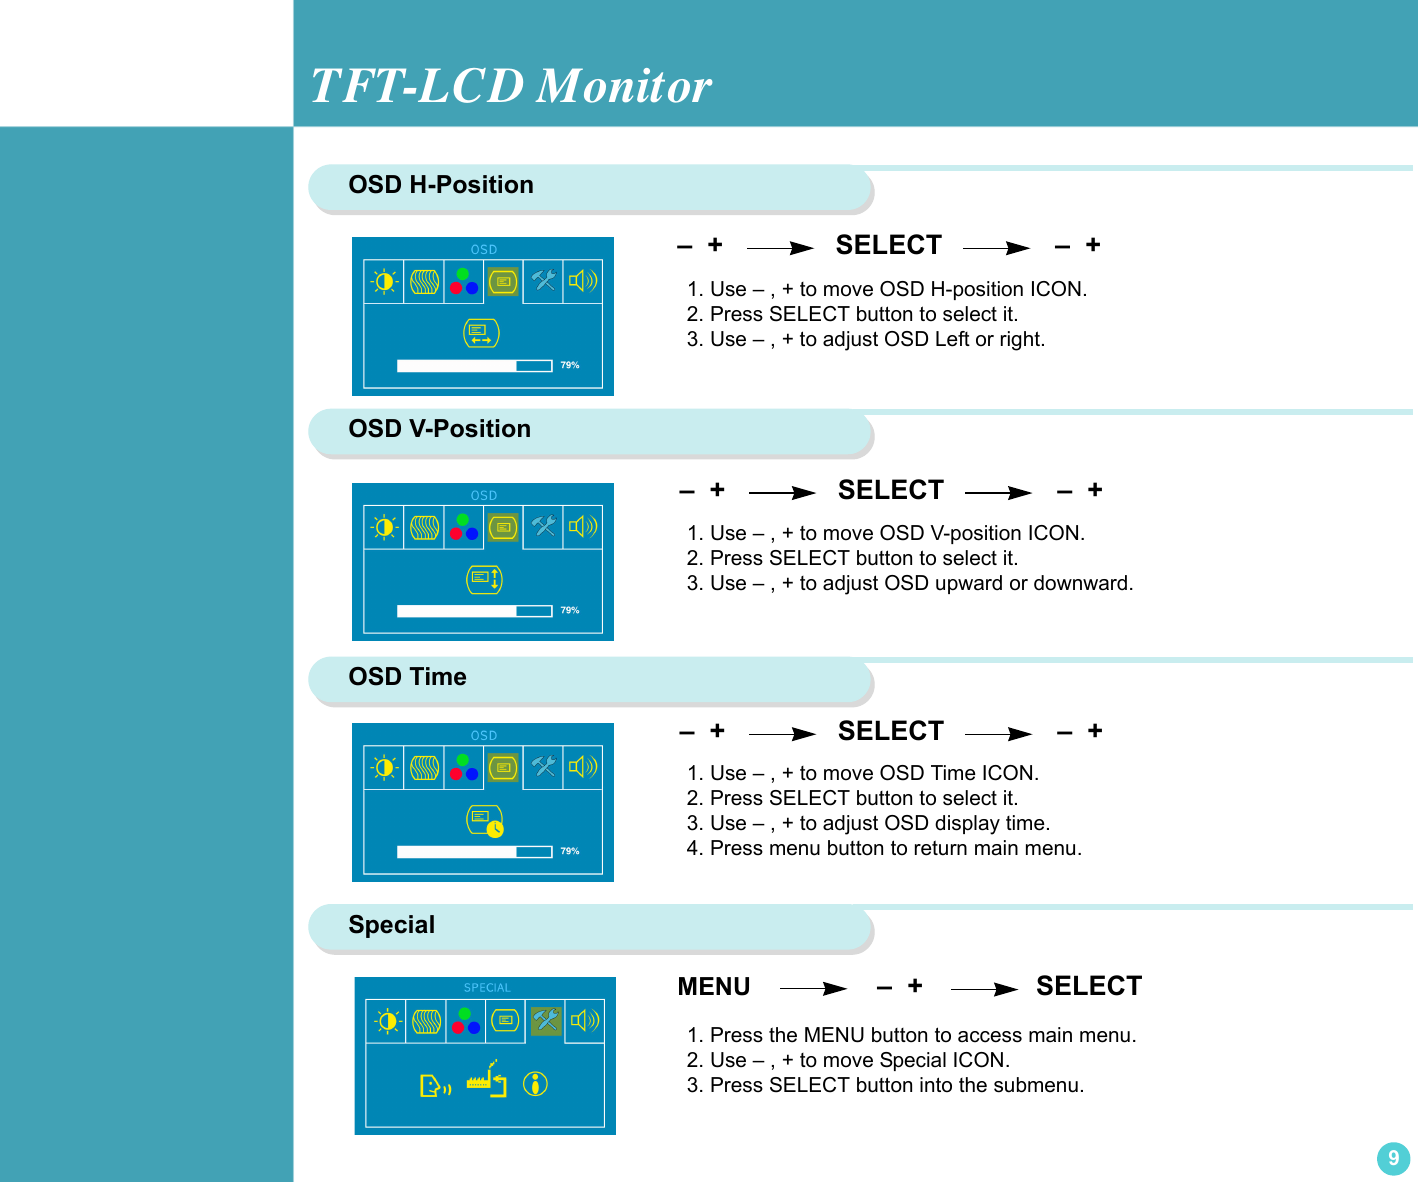 TFT-LCD Monitor9OSD H-Position  –  +                SELECT               –  +               1. Use – , + to move OSD H-position ICON.2. Press SELECT button to select it.3. Use – , + to adjust OSD Left or right.OSD V-Position 1. Use – , + to move OSD V-position ICON.2. Press SELECT button to select it.3. Use – , + to adjust OSD upward or downward.OSD Time1. Use – , + to move OSD Time ICON. 2. Press SELECT button to select it.3. Use – , + to adjust OSD display time.4. Press menu button to return main menu. –  +                SELECT               –  +                 –  +                SELECT               –  +               Special1. Press the MENU button to access main menu.2. Use – , + to move Special ICON.3. Press SELECT button into the submenu. MENU                  –  +               SELECT